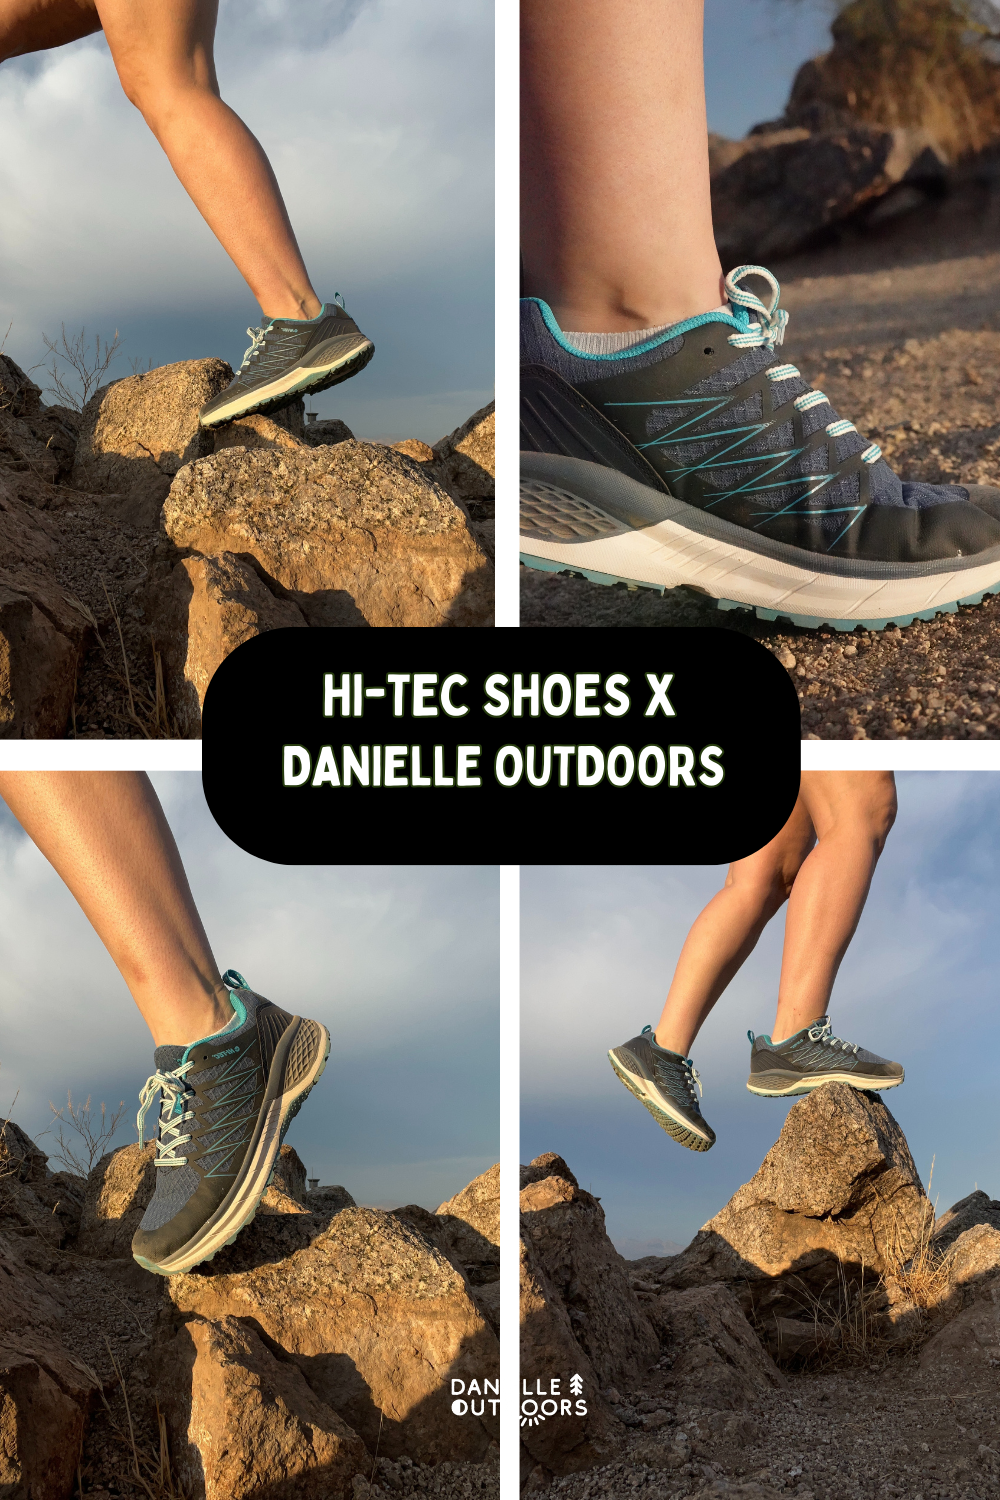 photos of hiking shoes outdoors on a rock